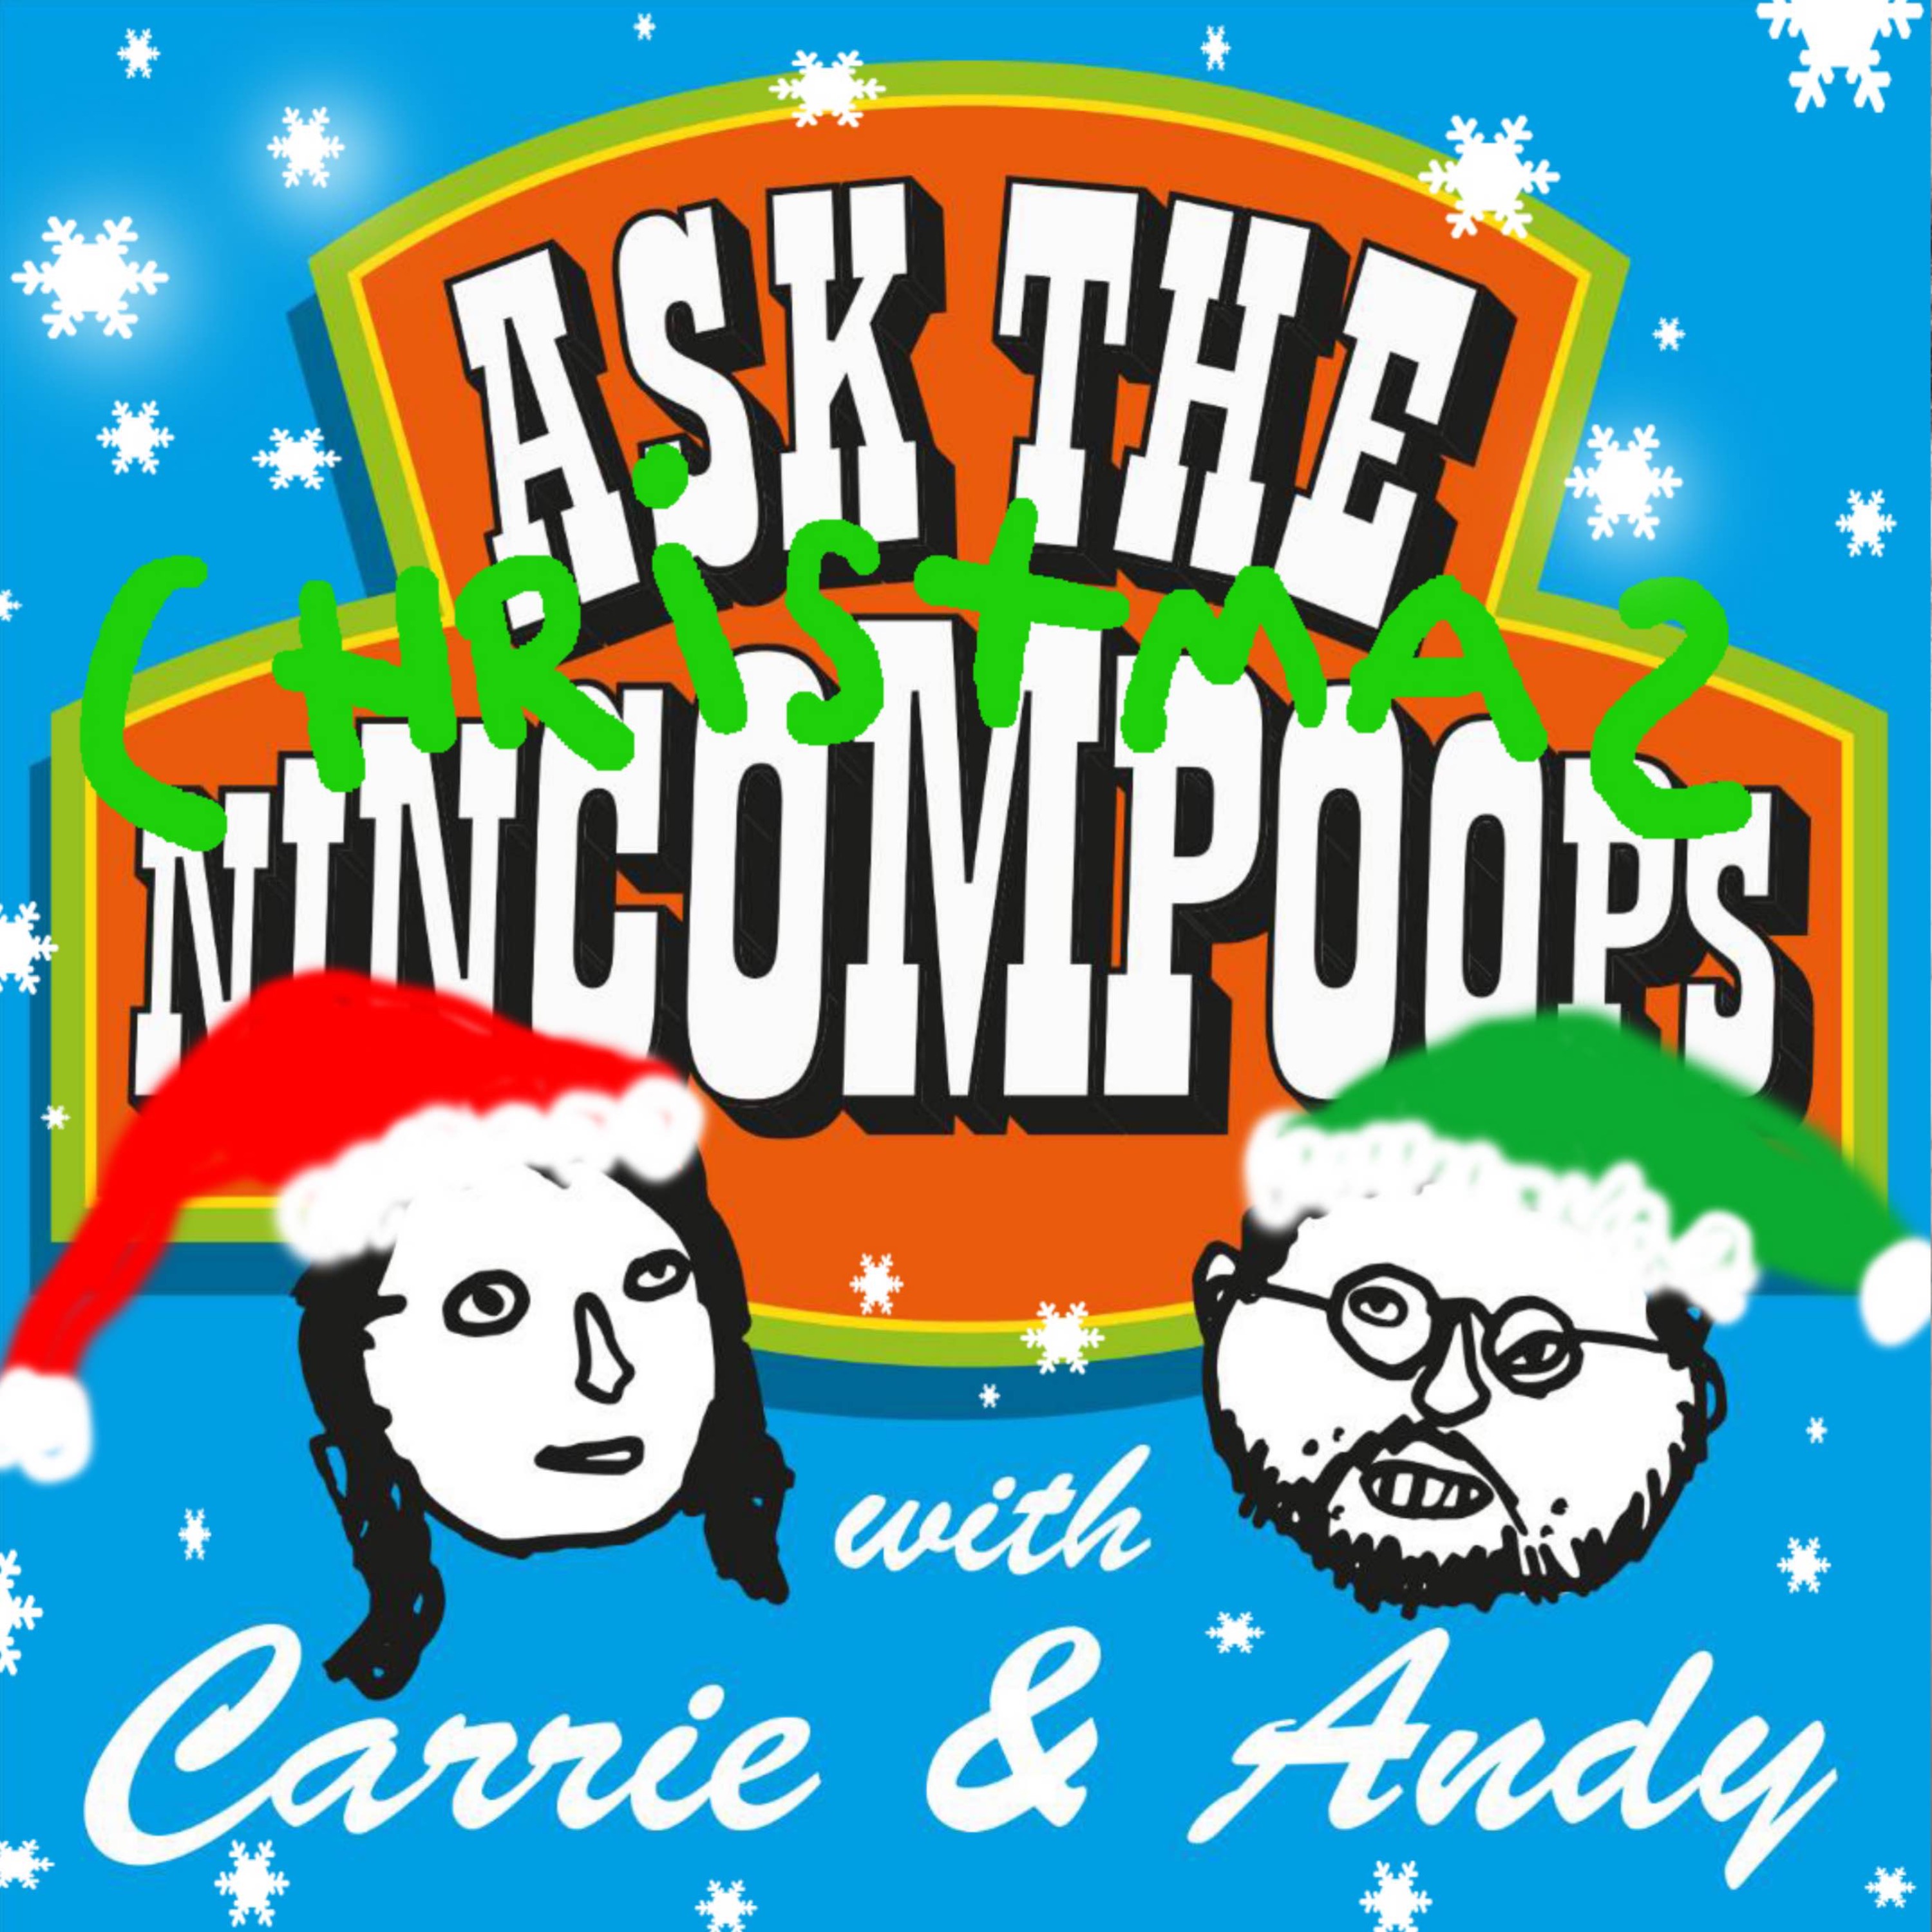 ASK THE CHRISTMAS NINCOMPOOPS live on Saturday 17th December at Kings Place in London!